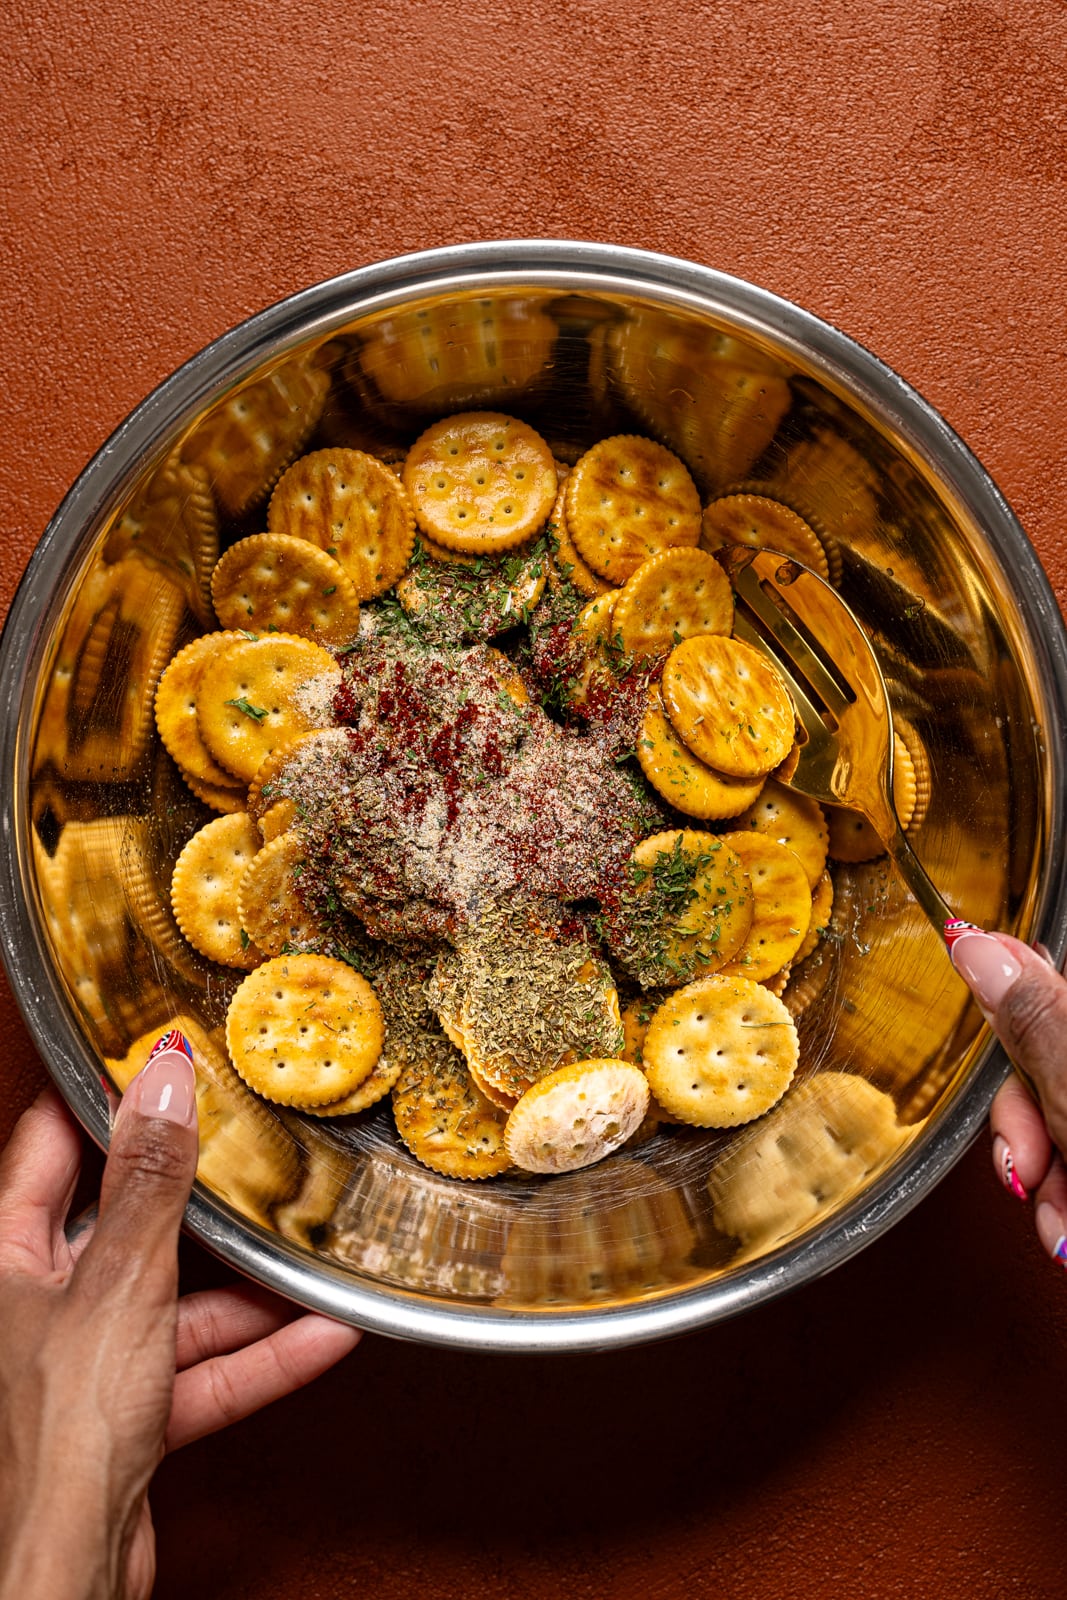 Crackers and ingredients in a silver bowl.